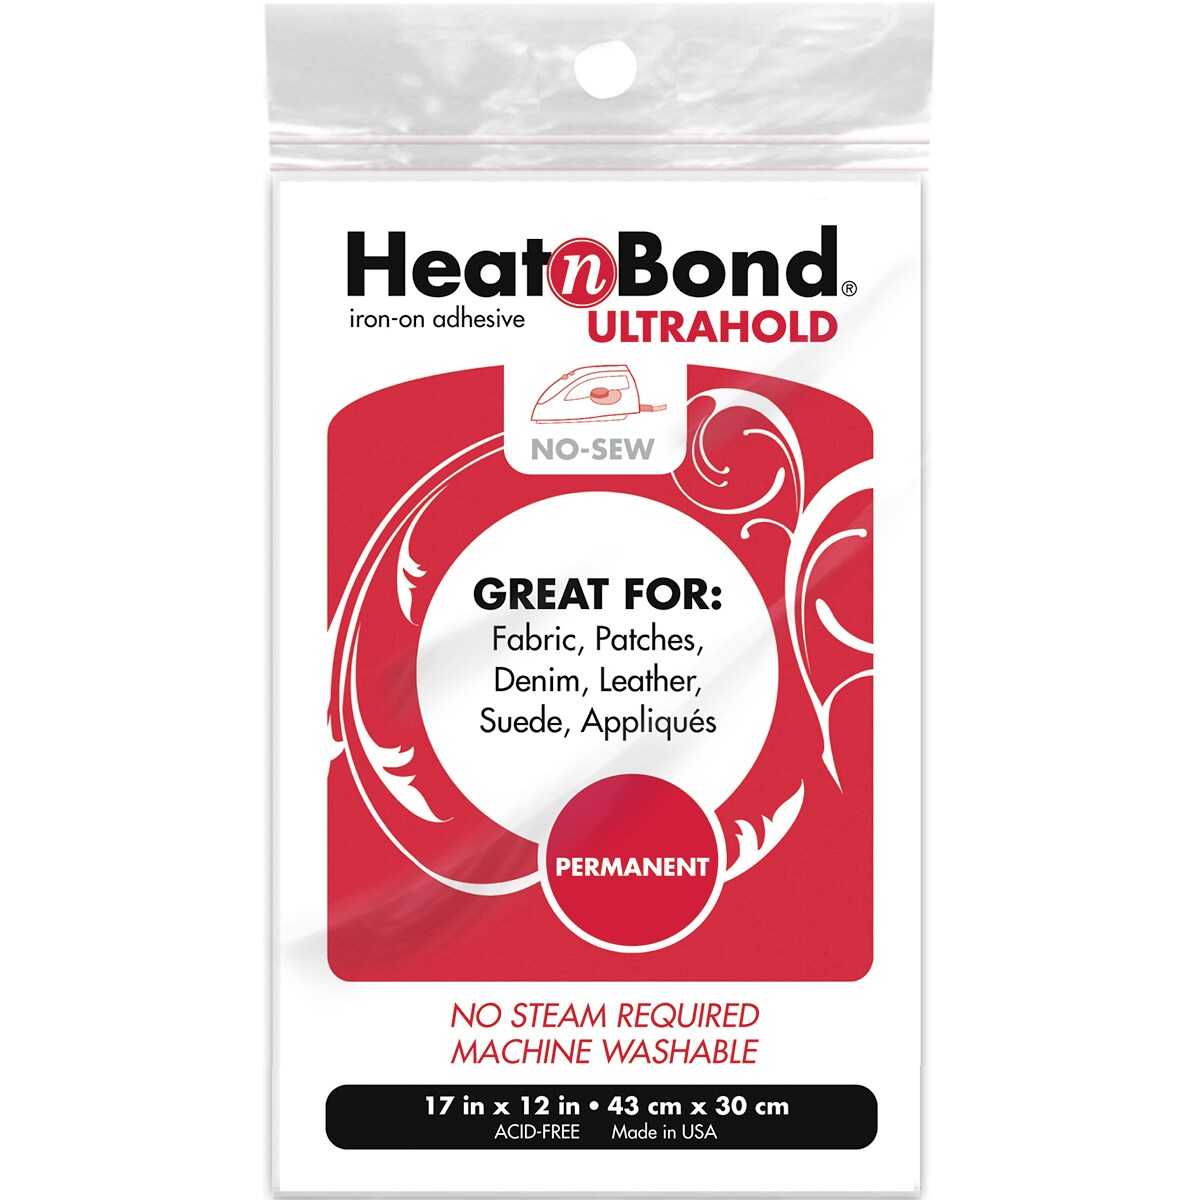 HeatnBond UltraHold Iron-On Adhesive, 17 Inches x 1 Yard plus open packet